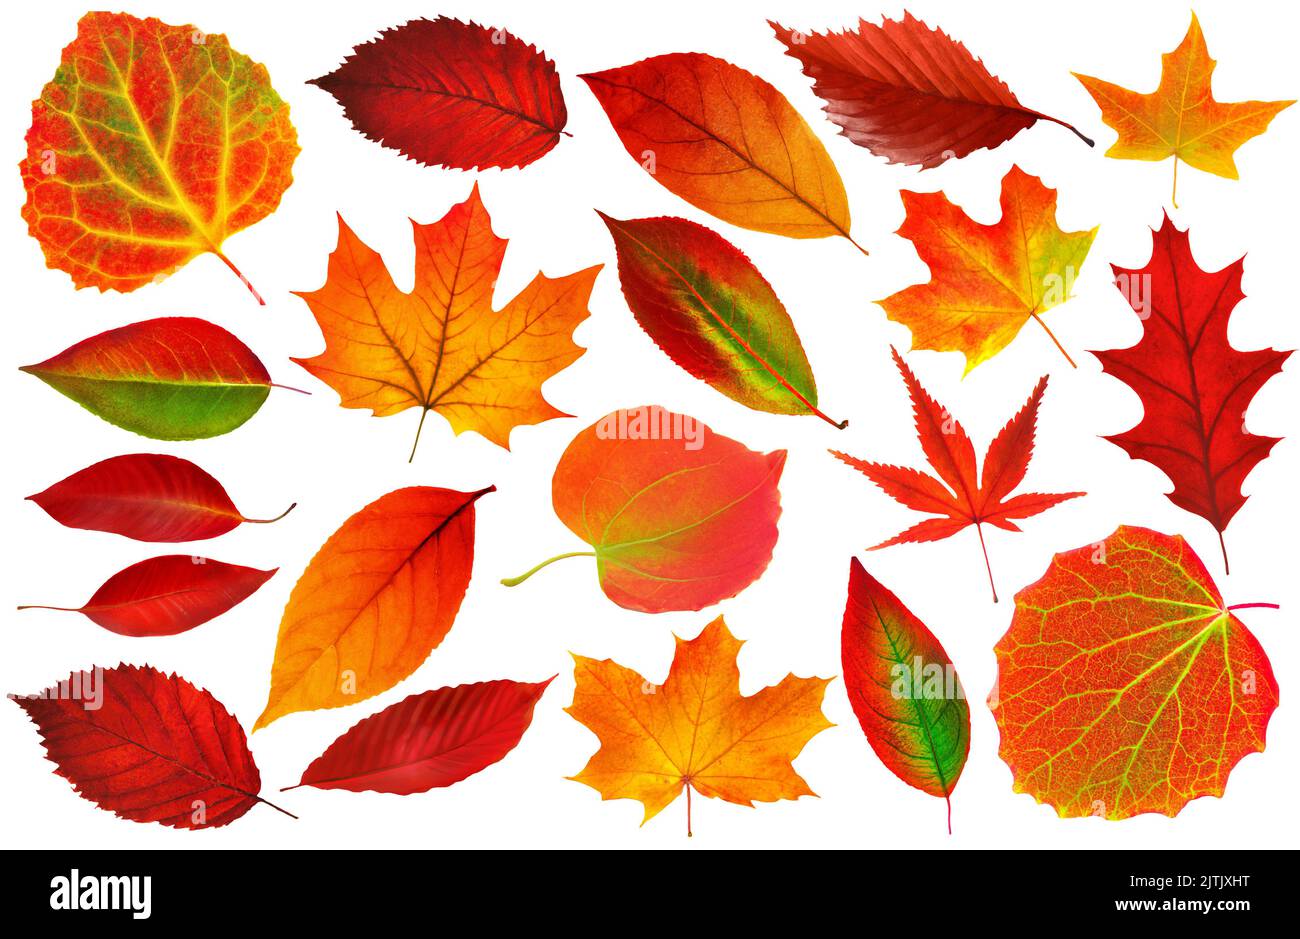 Collection of 25 red autumn tree leaves on white background. Realistic digital illustration based on render by neural network Stock Photo